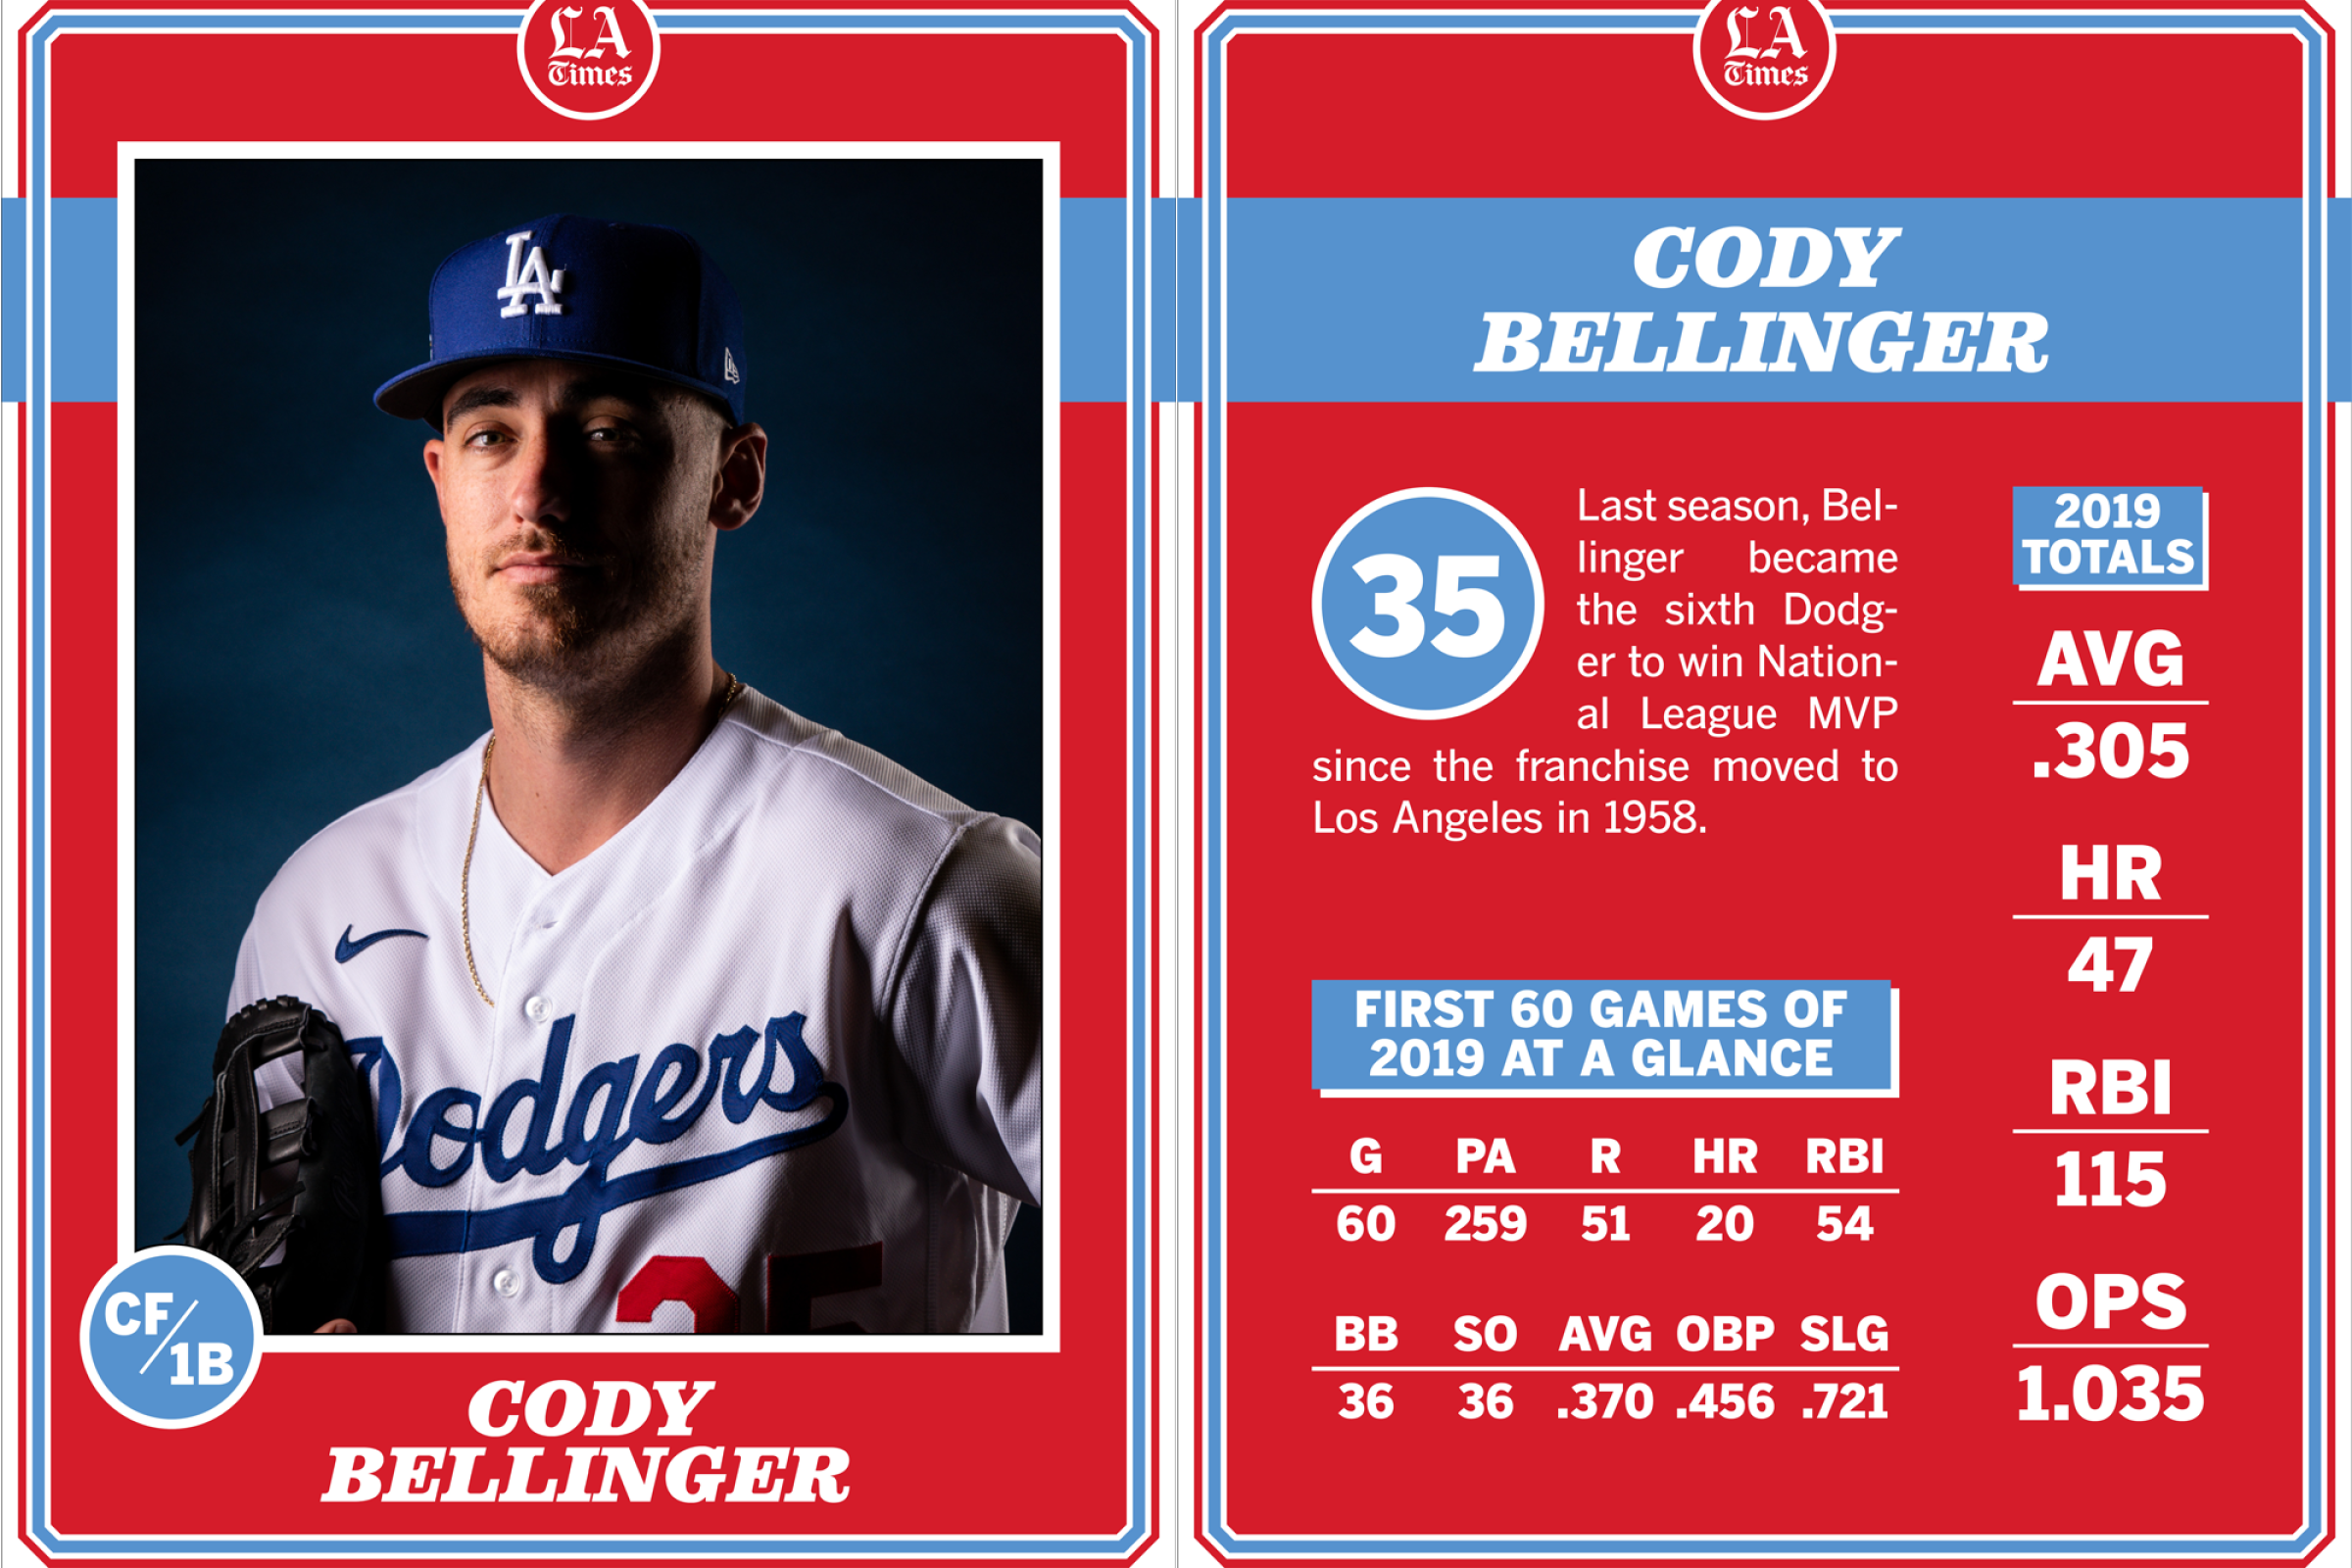 Cody Bellinger will start in center field for the Dodgers on opening day.